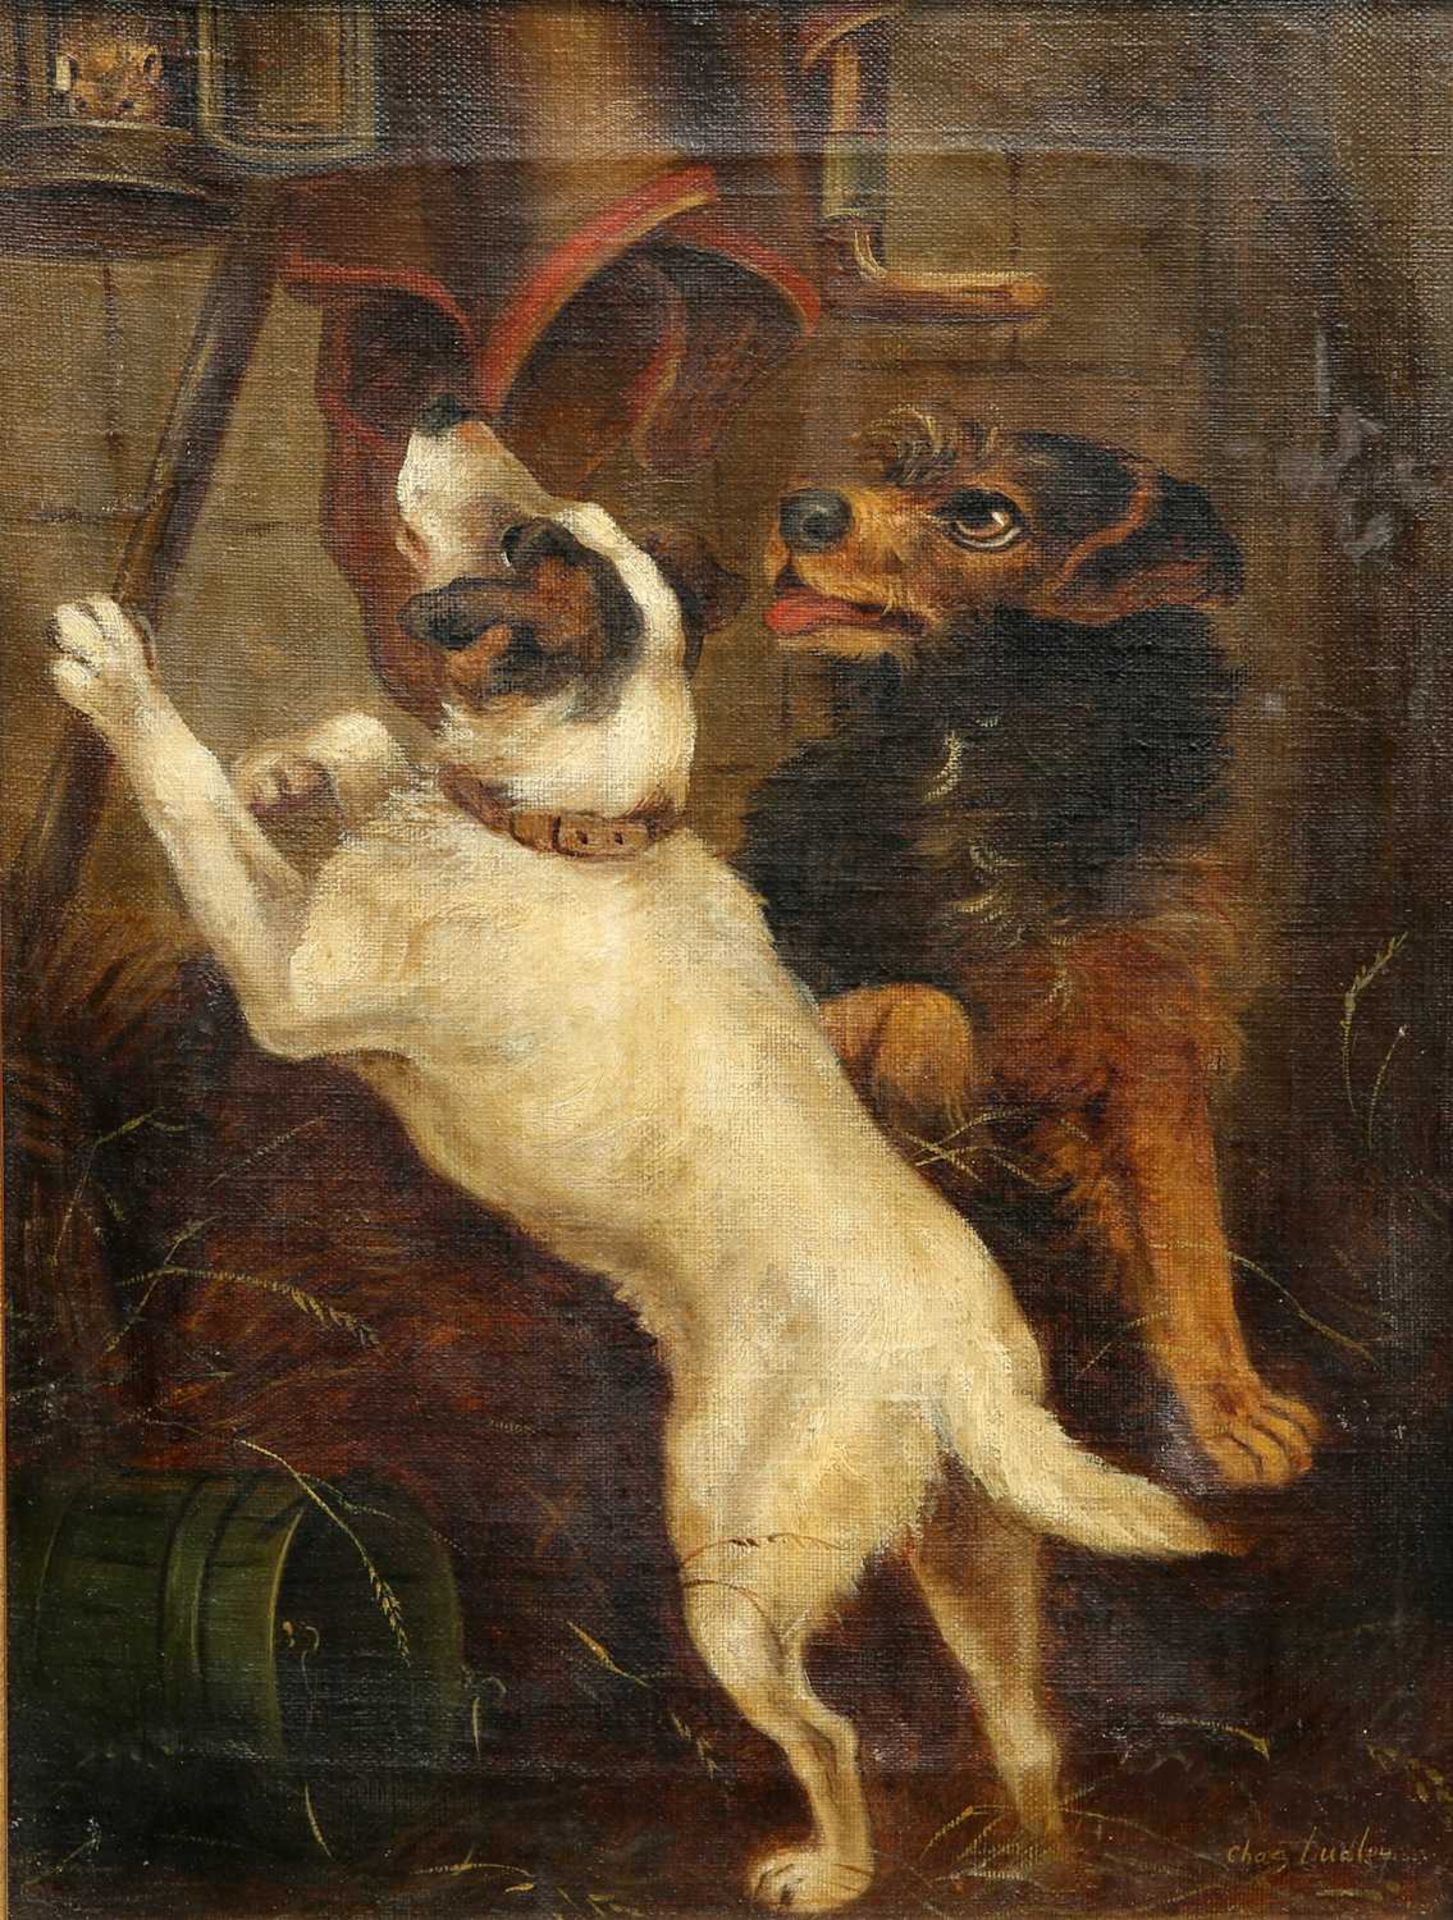 CHARLES DUDLEY (1826-1909) A PAIR OF PICTURES OF TERRIERS CATCHING RATS - Image 2 of 4